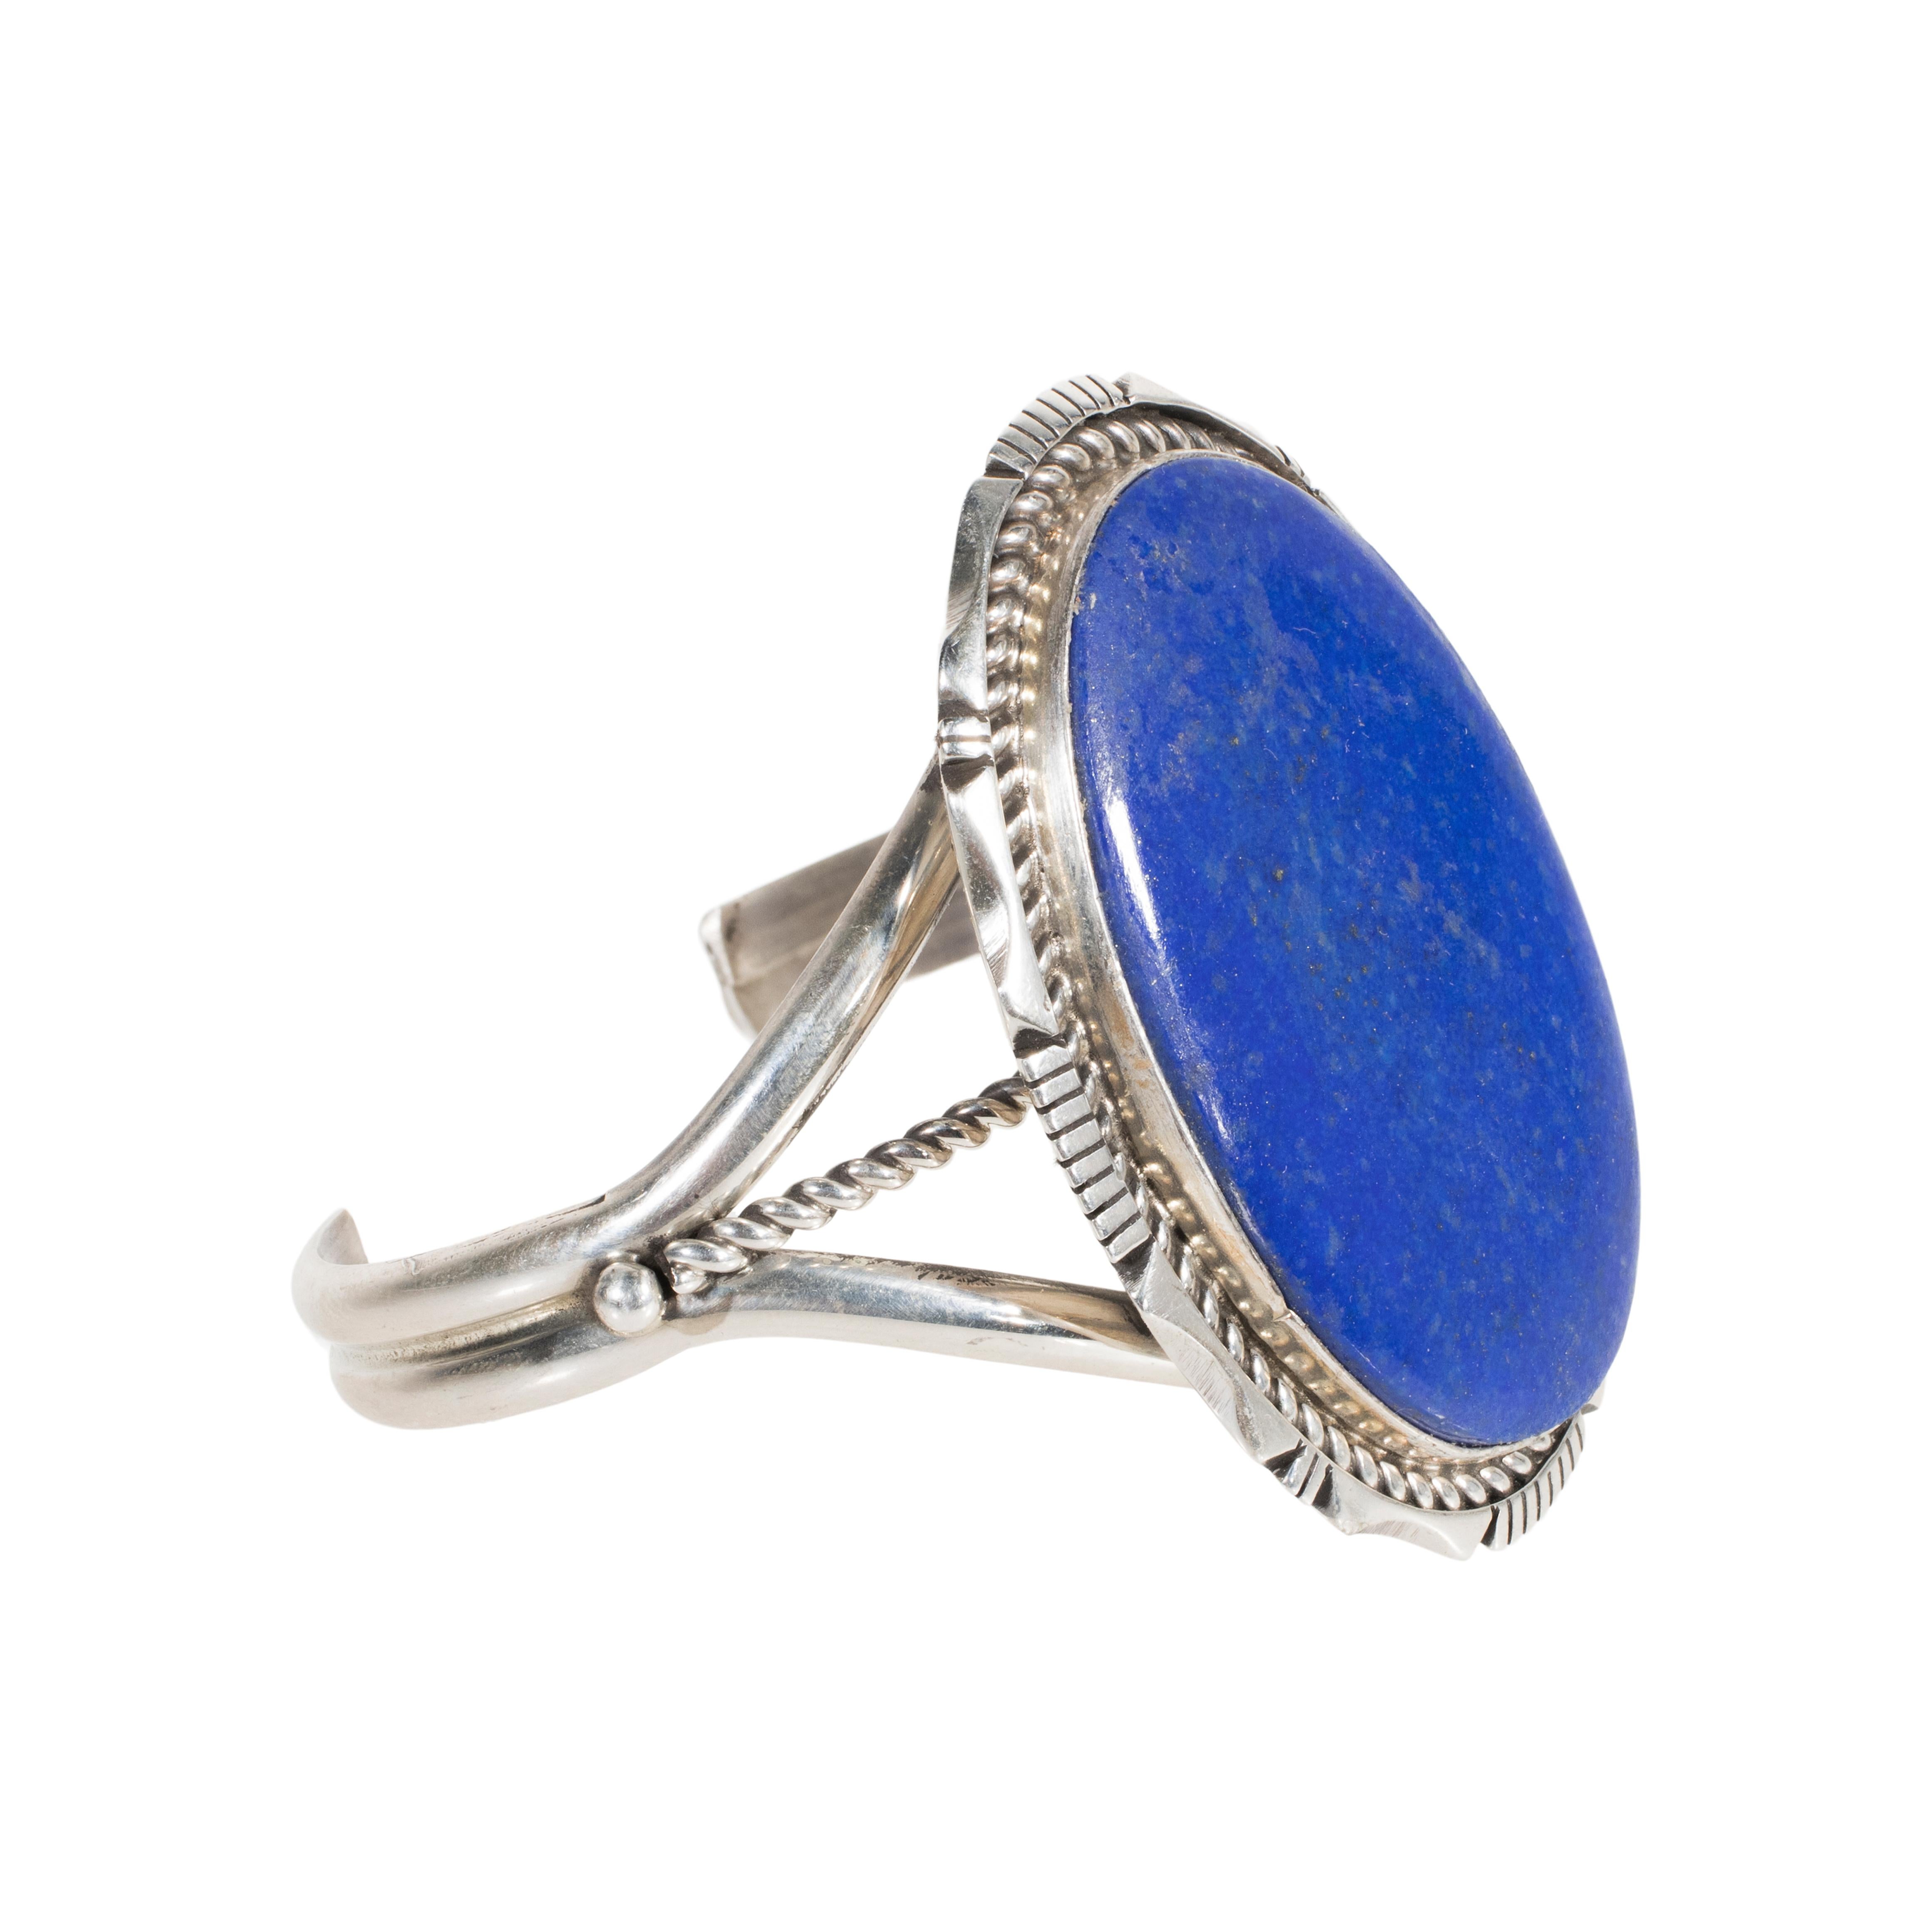 Sterling silver lapis cuff bracelet by Eddie Sacattro. This bracelet has a large oval cut lapis center stone accented with a rope and notched frame. Stamped sterling and hallmarked ES.

PERIOD: Mid 20th Century

ORIGIN: Southwest, United